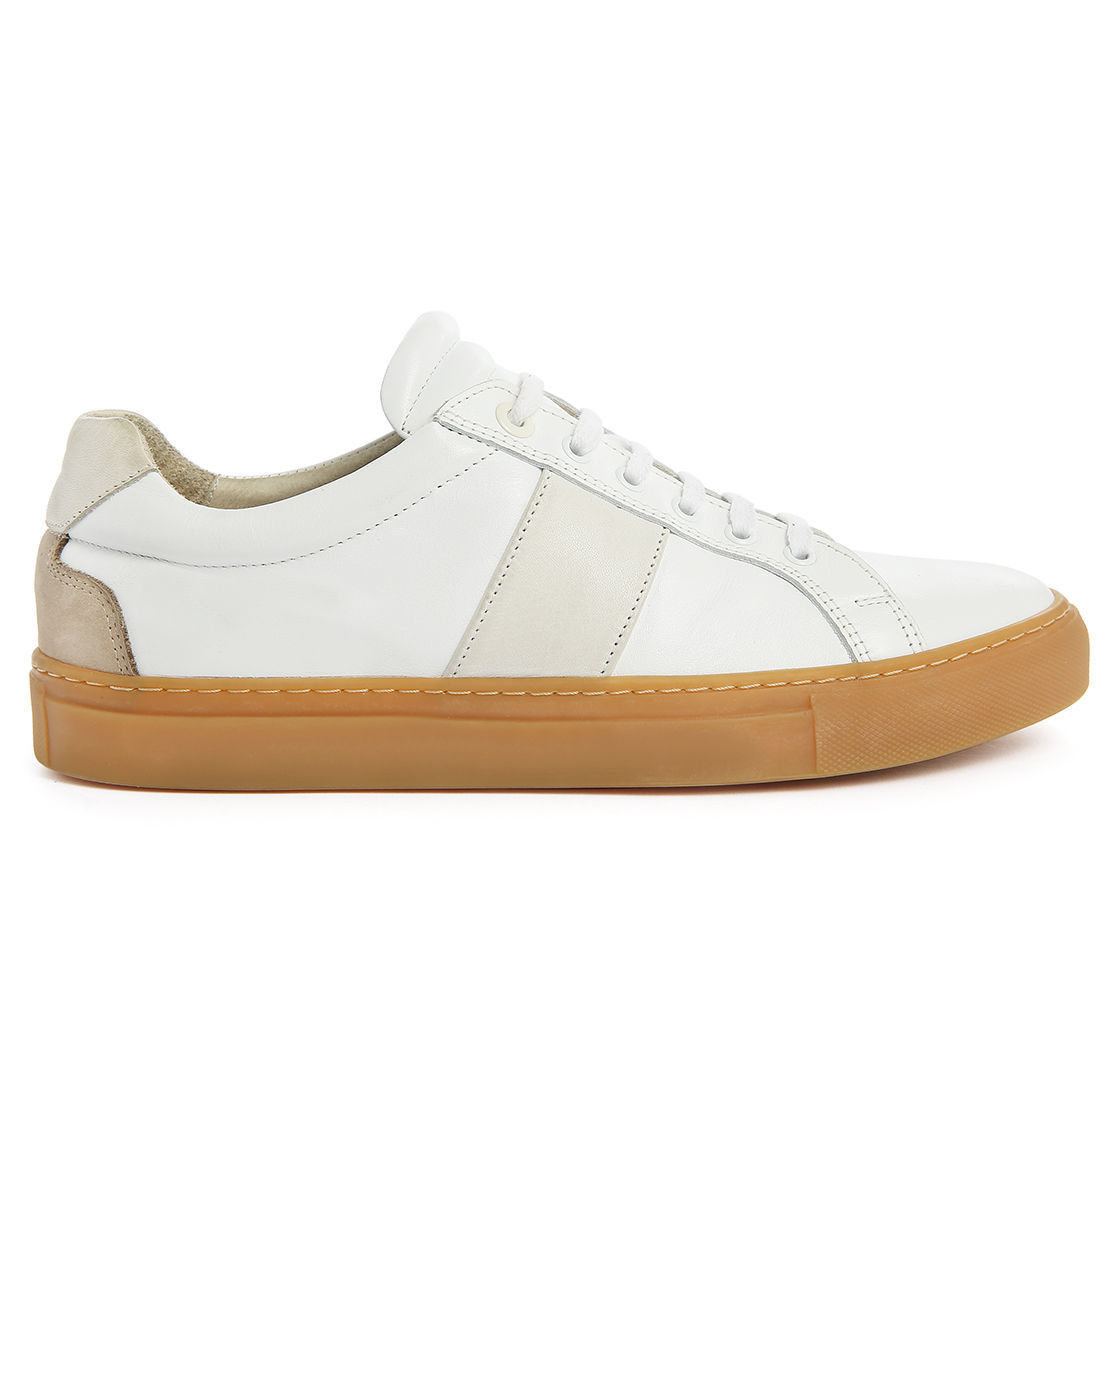 National standard Edition 4 White Leather Gum Sole Sneakers in White ...